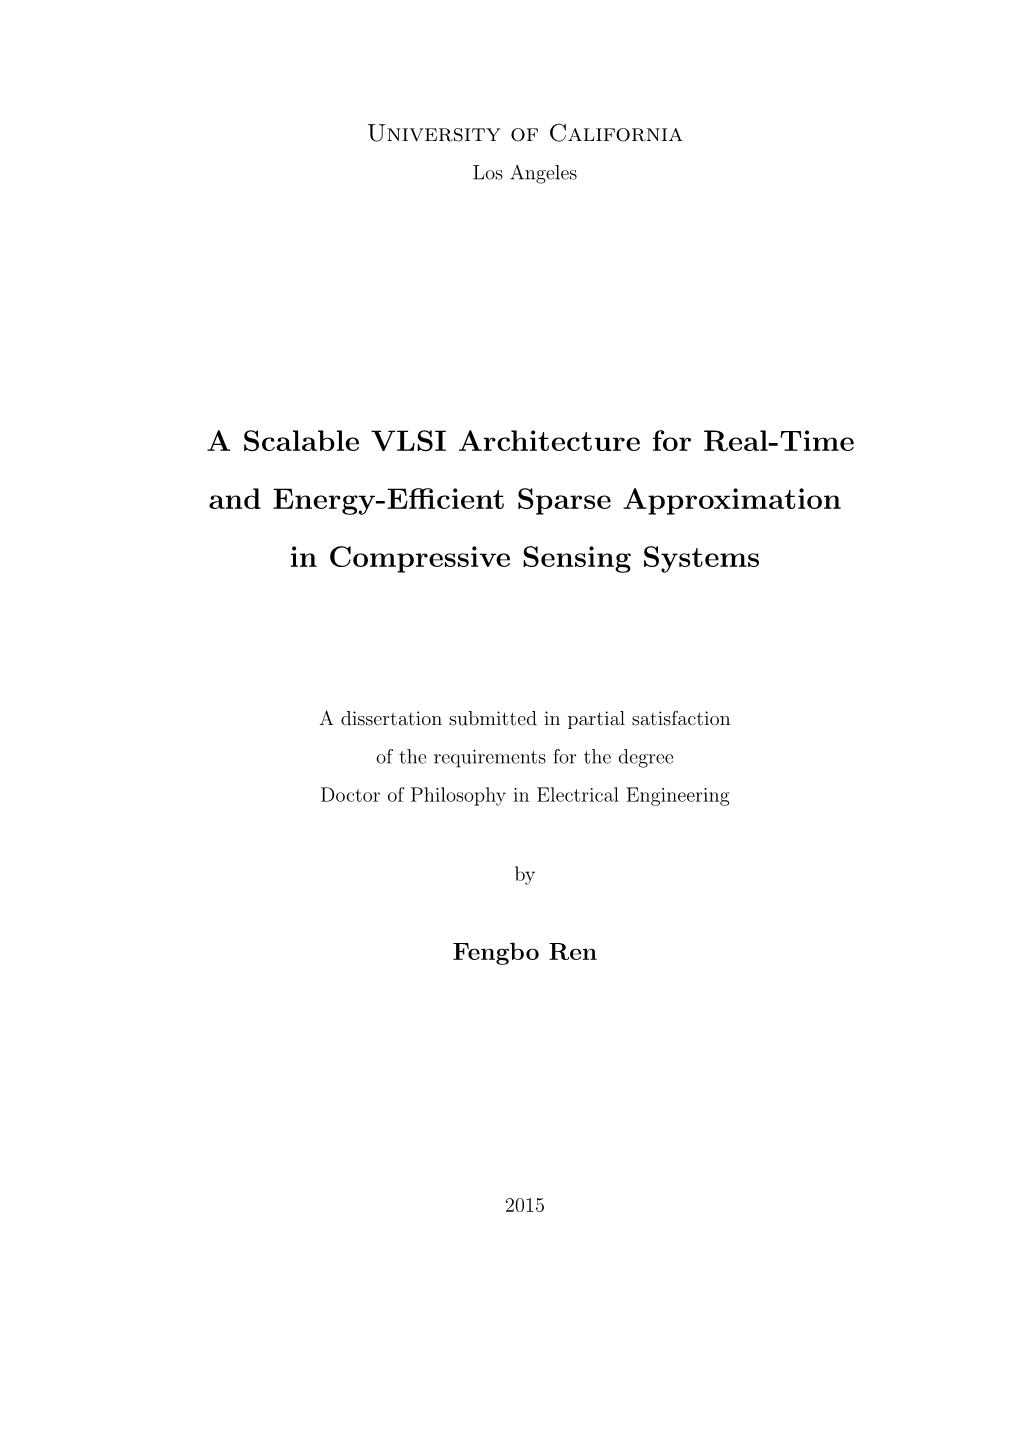 A Scalable VLSI Architecture for Real-Time and Energy-Eﬃcient Sparse Approximation in Compressive Sensing Systems